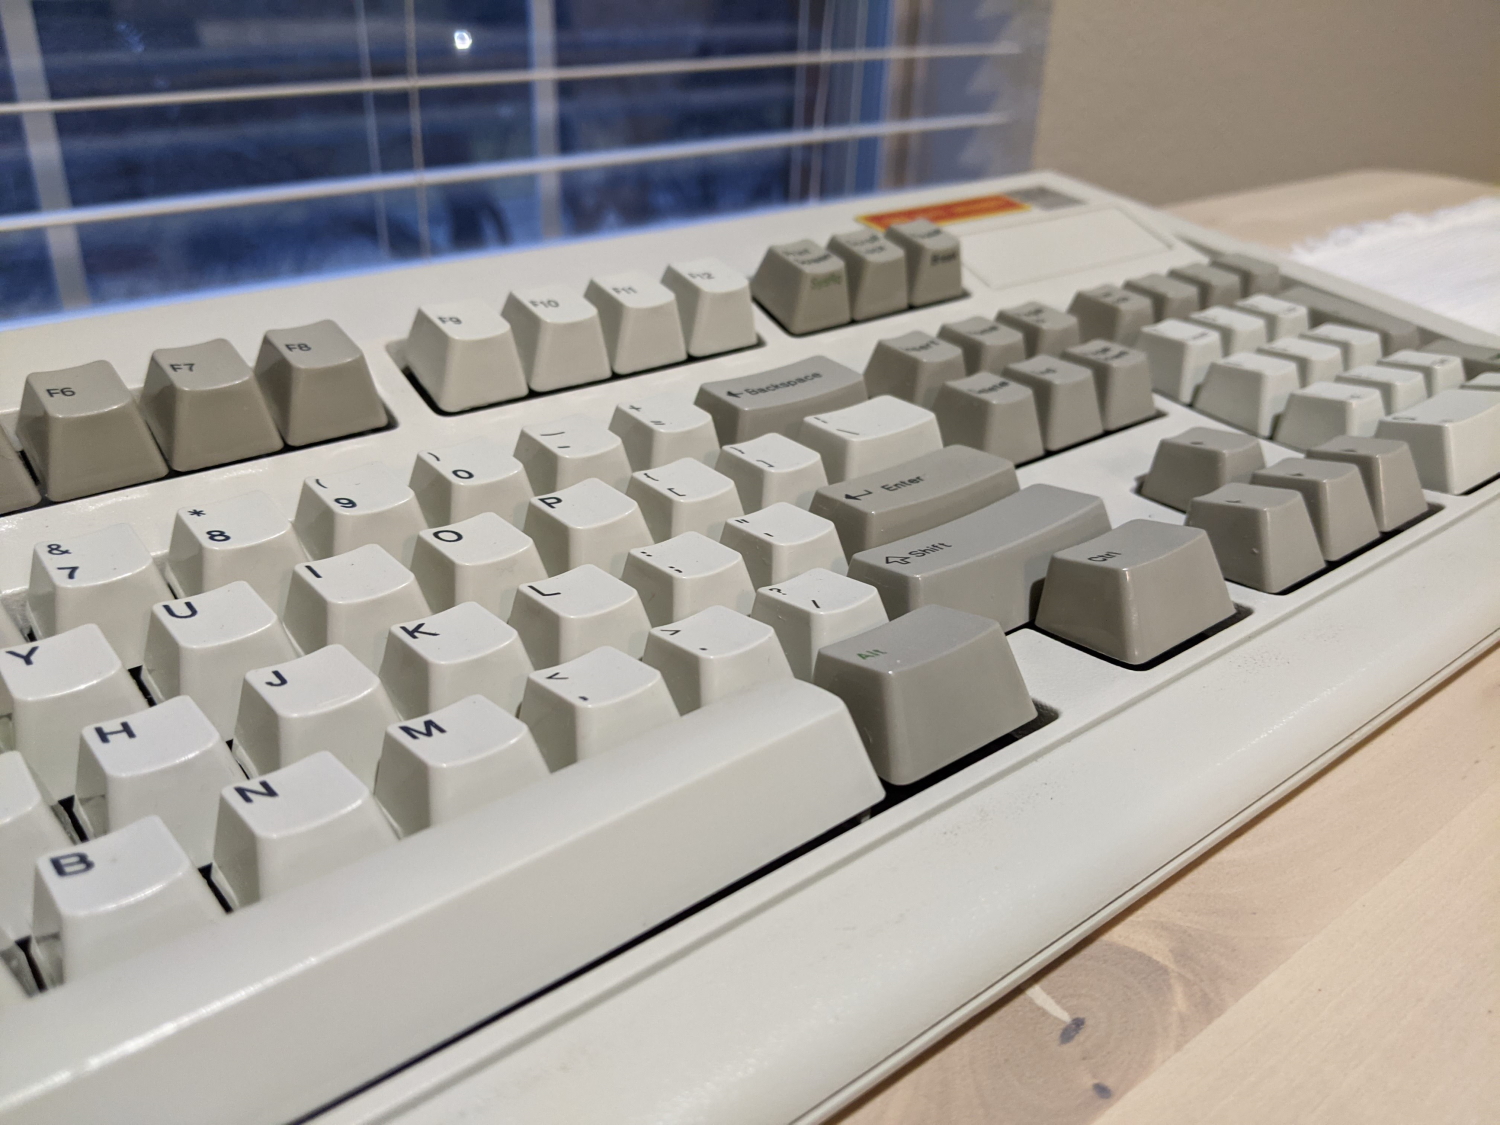 Closeup picture of cleaned keyboard reassembled